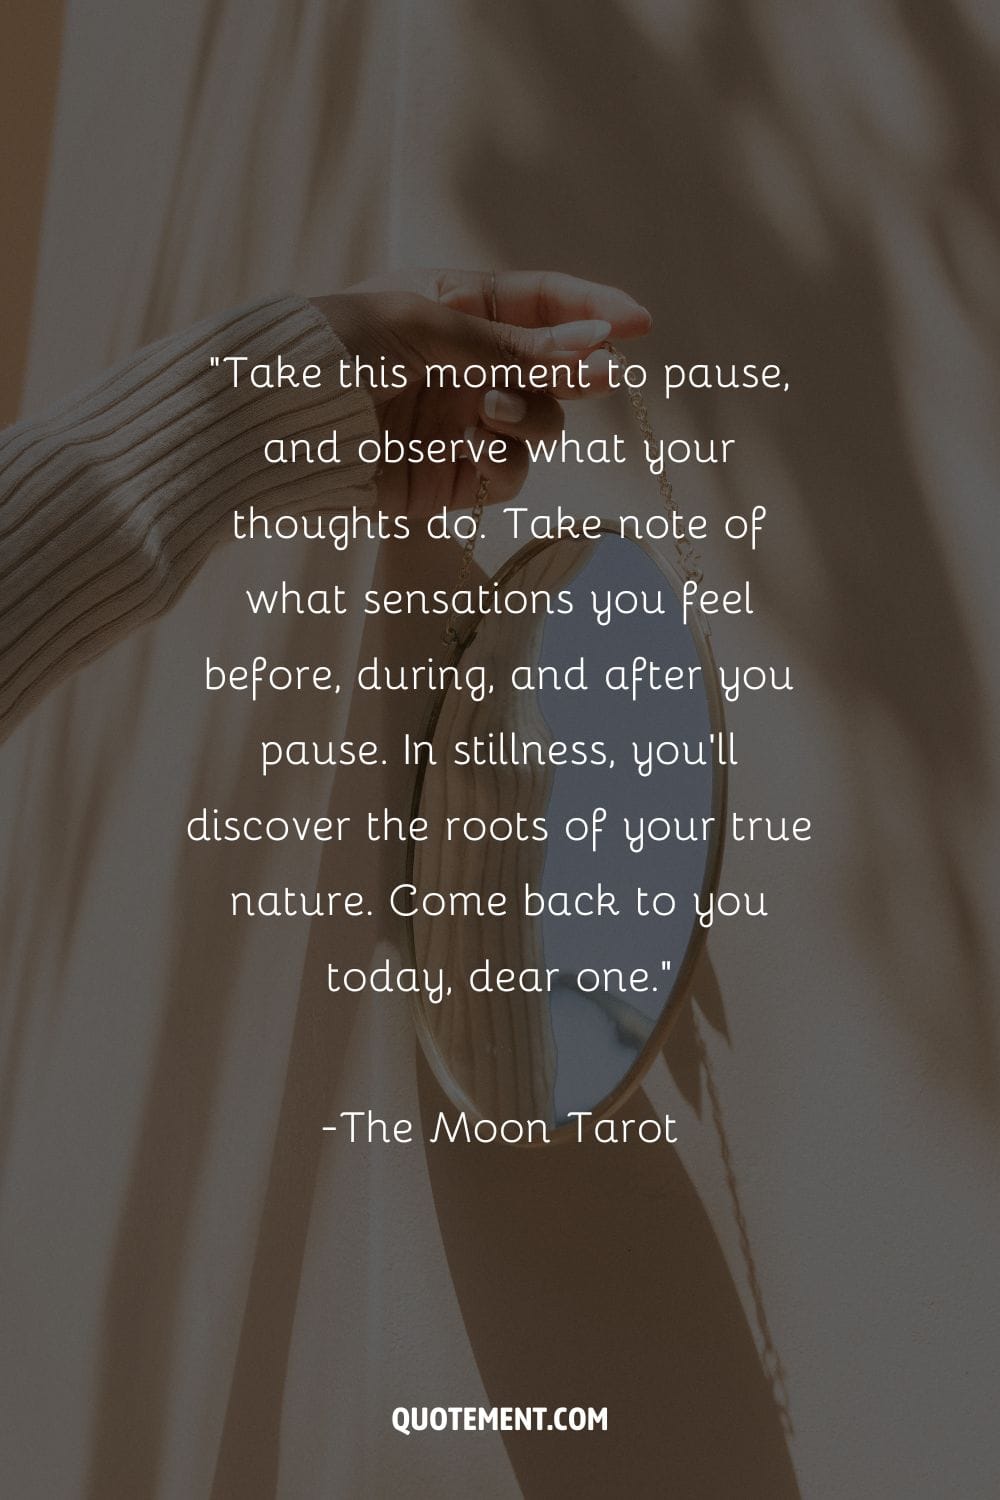 Take this moment to pause, and observe what your thoughts do.